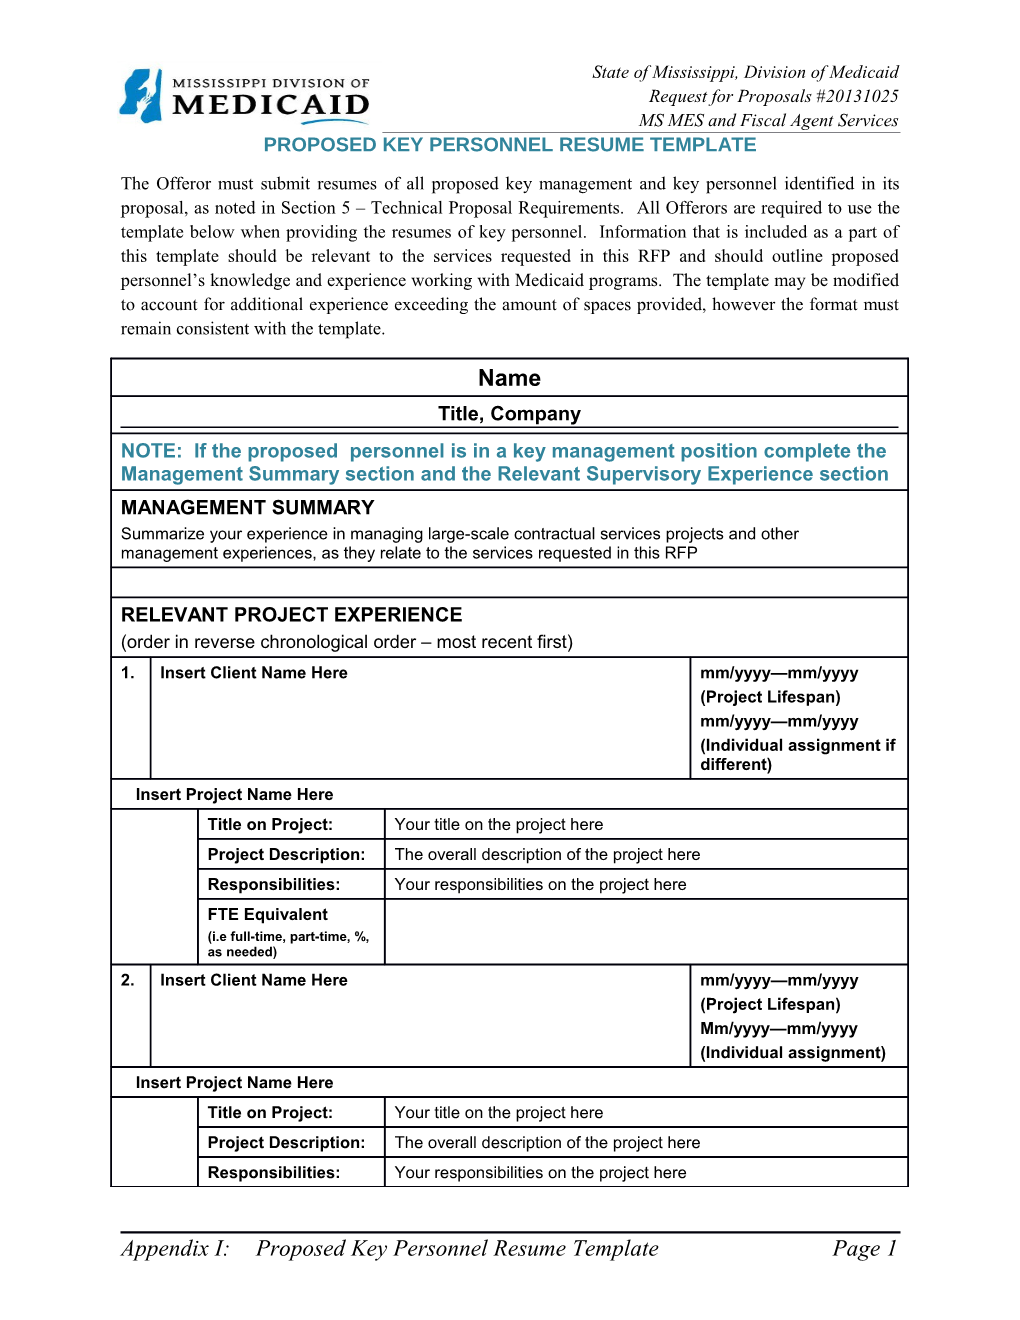 PROPOSED KEY PERSONNEL Resume Template